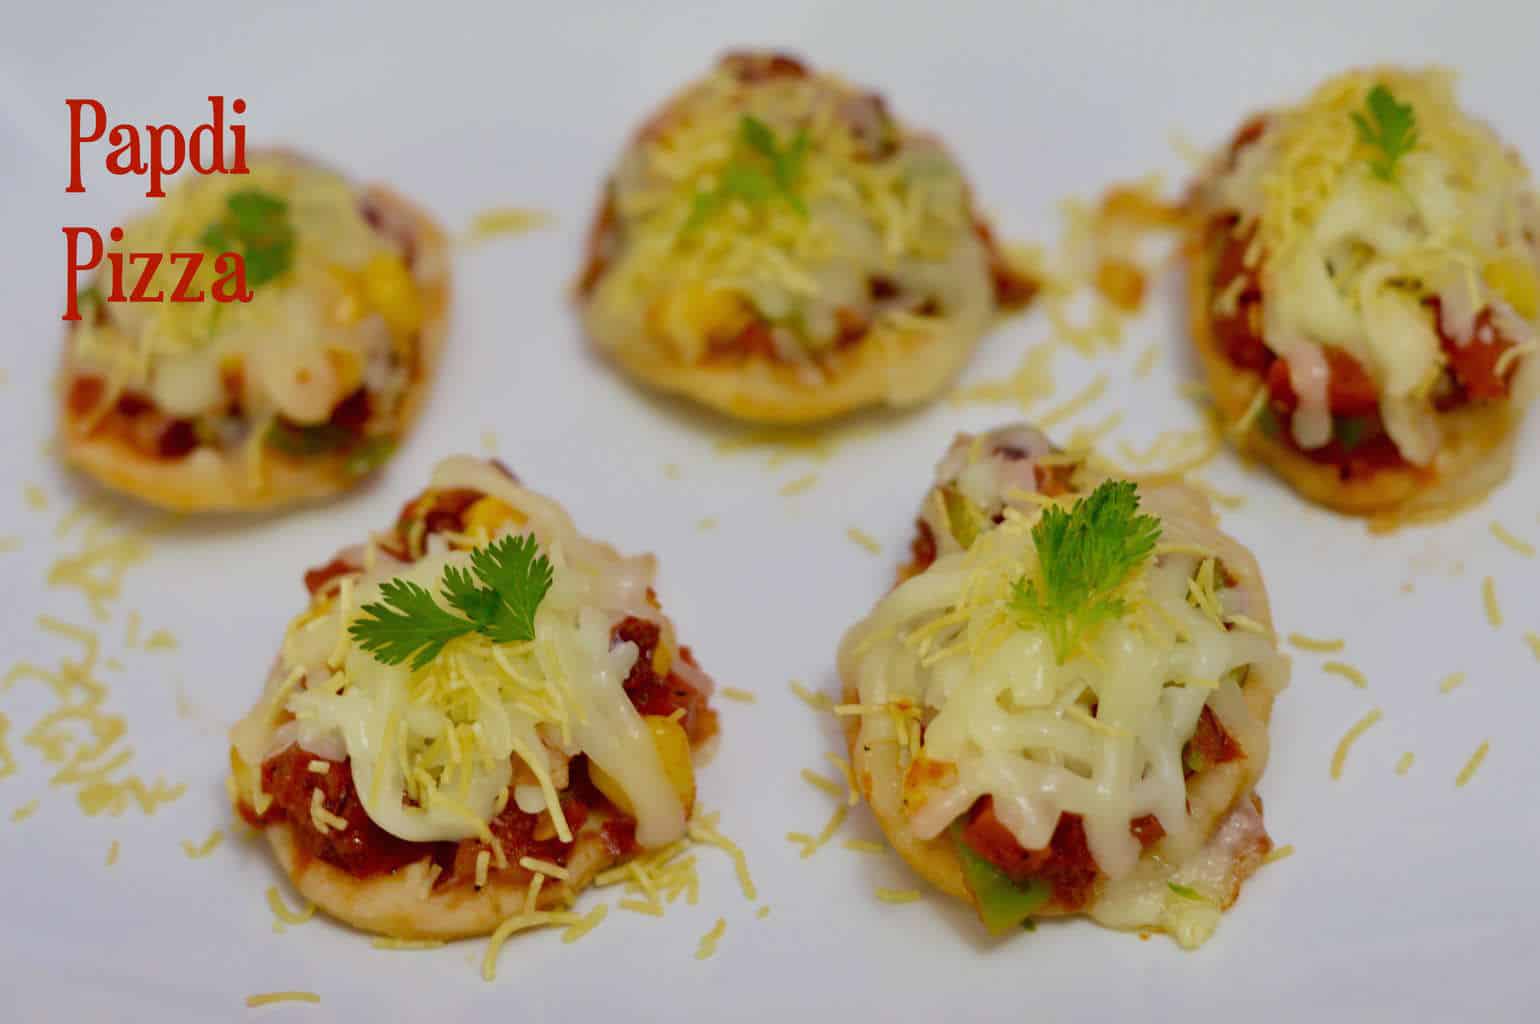 Papdi Pizza|Tea Time Snack is a simple, easy snack recipe where papris are spread with pizza sauce mixed with some toppings and and then topped with shredded cheese and baked.